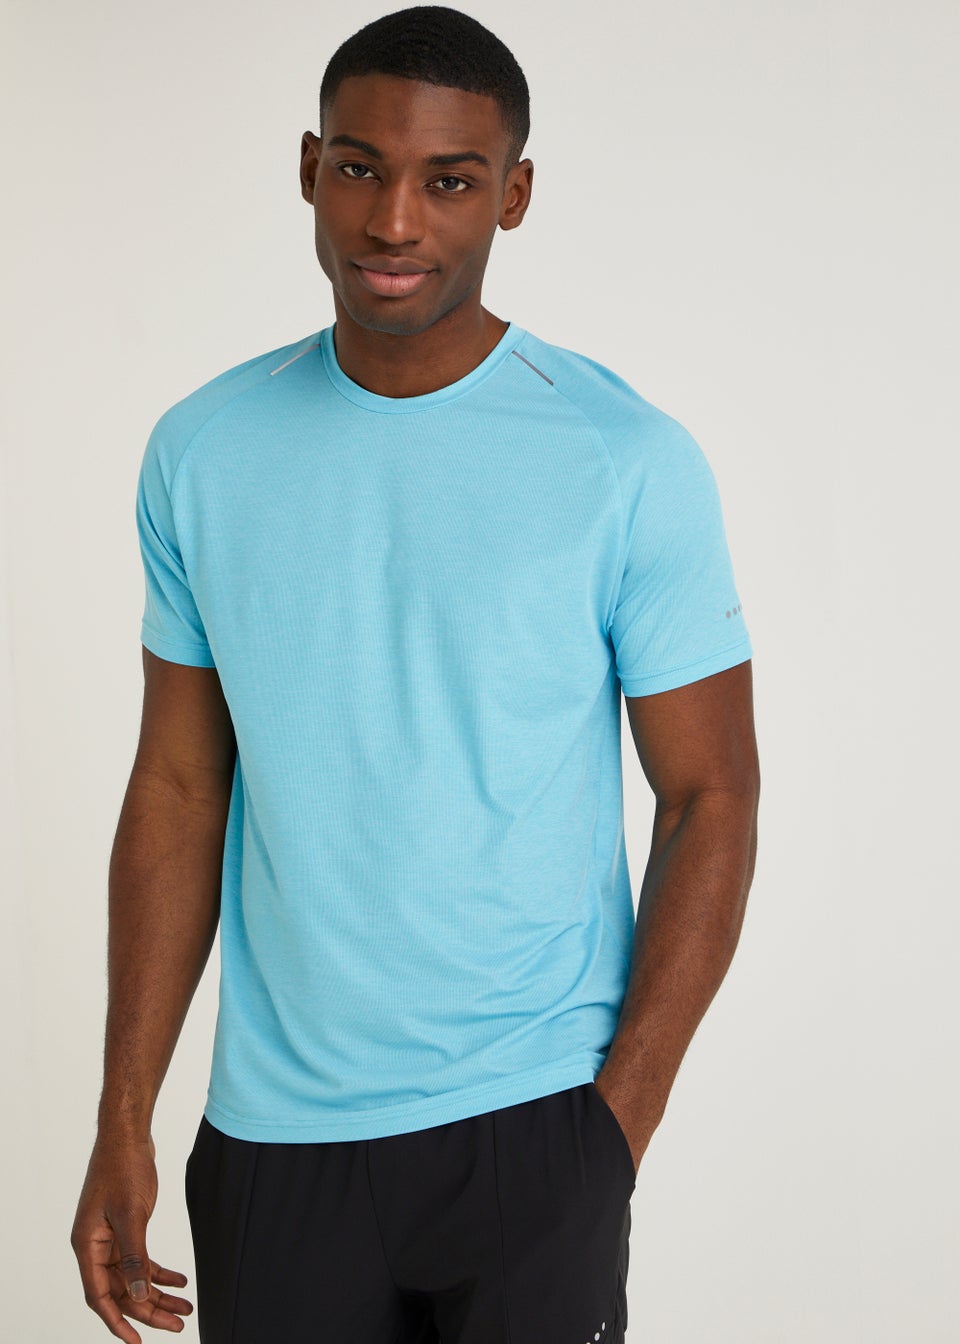 Men's Tees and Sports T-Shirts